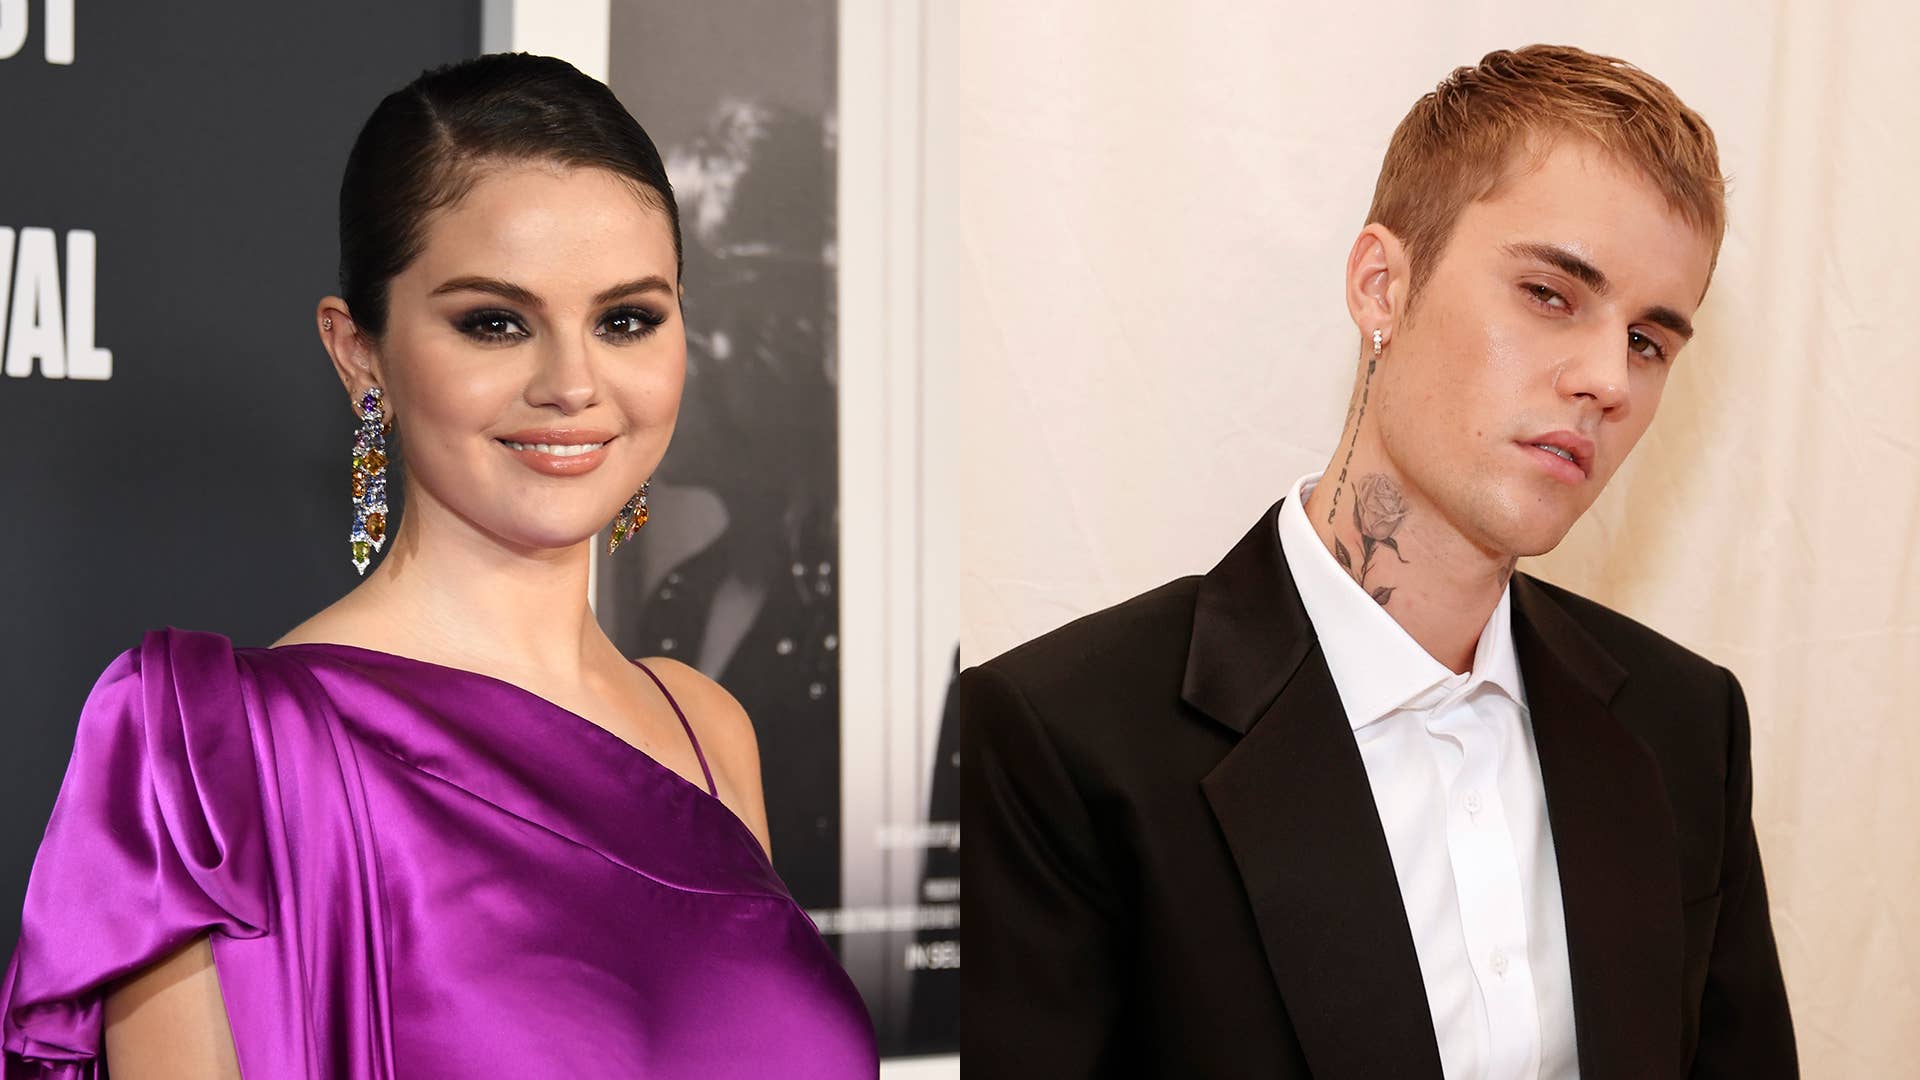 Selena Gomez and Justin Bieber, who formerly dated